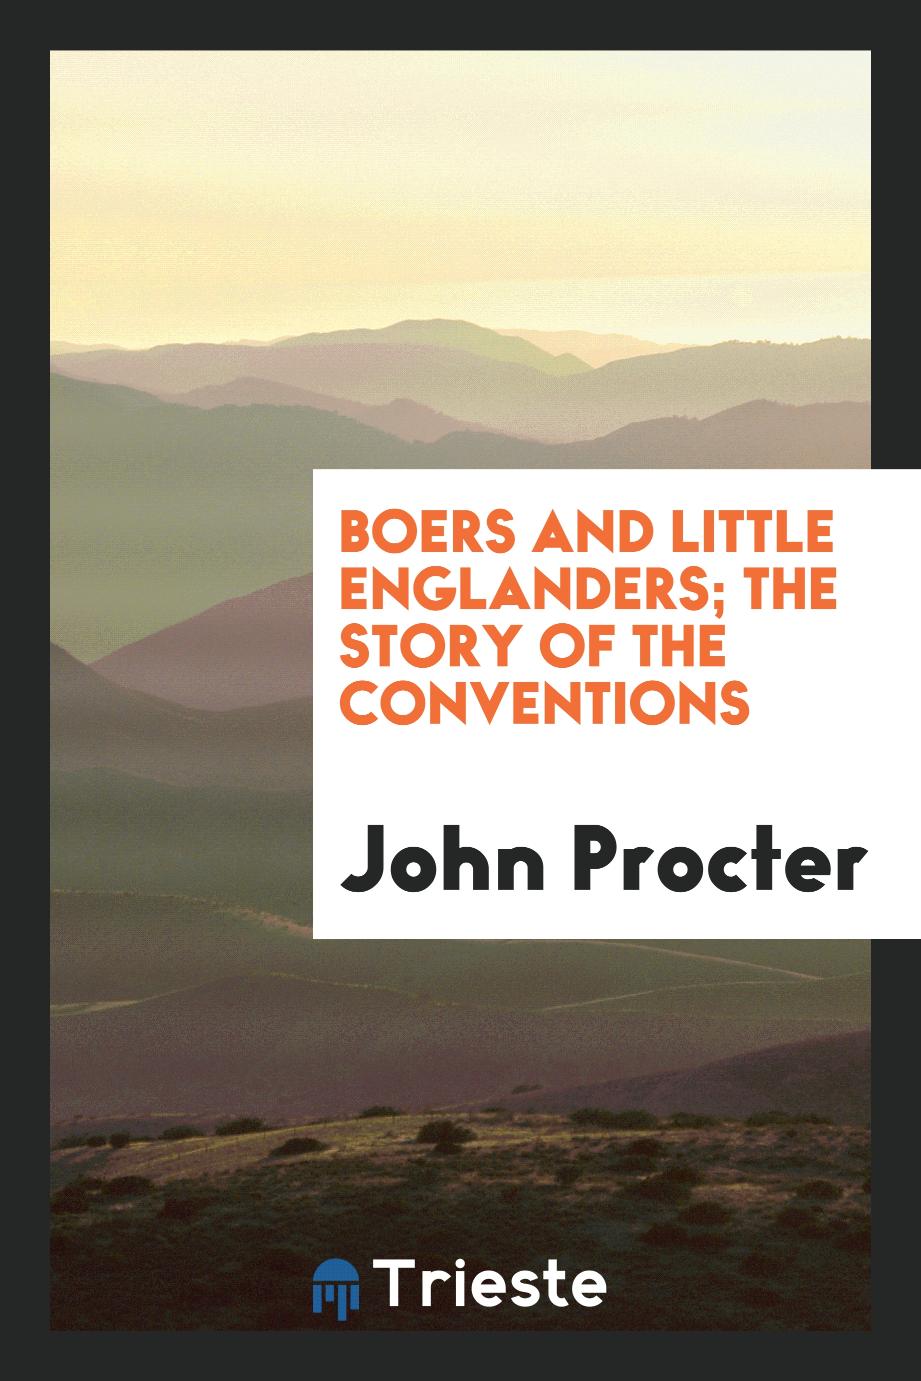 Boers and Little Englanders; the story of the conventions